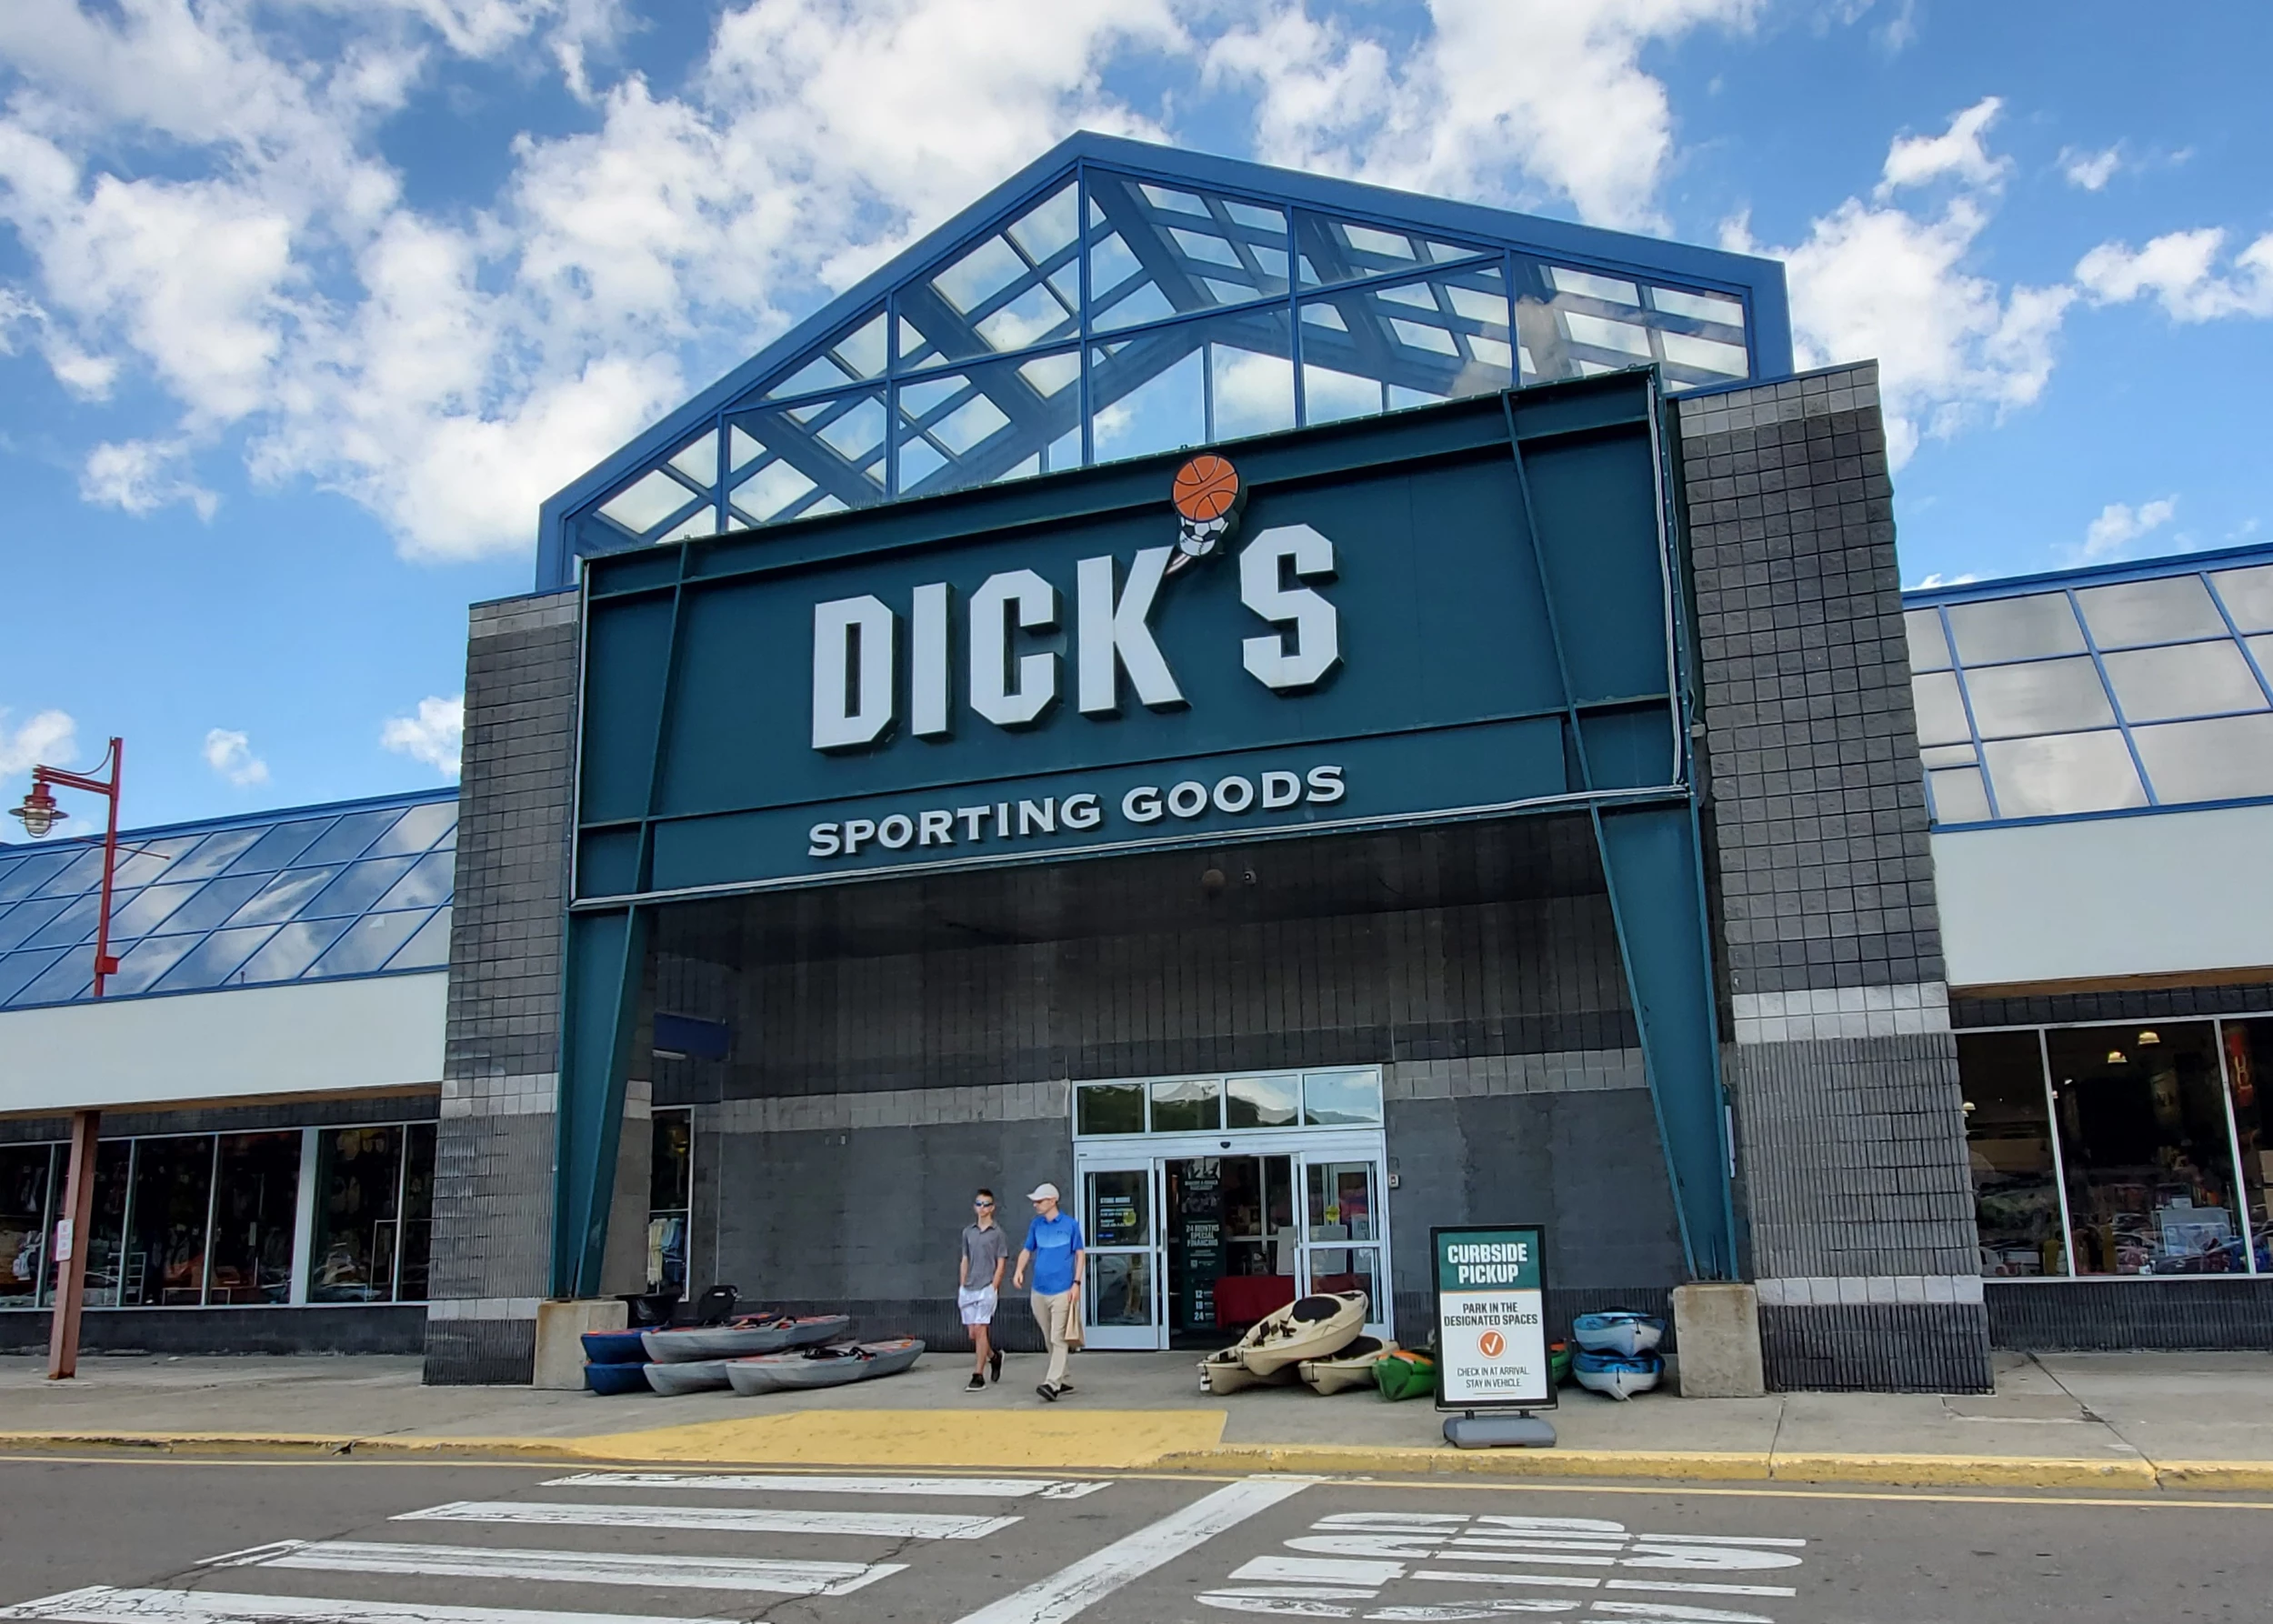 How Dick's Sporting Goods uses data to make its products stand out